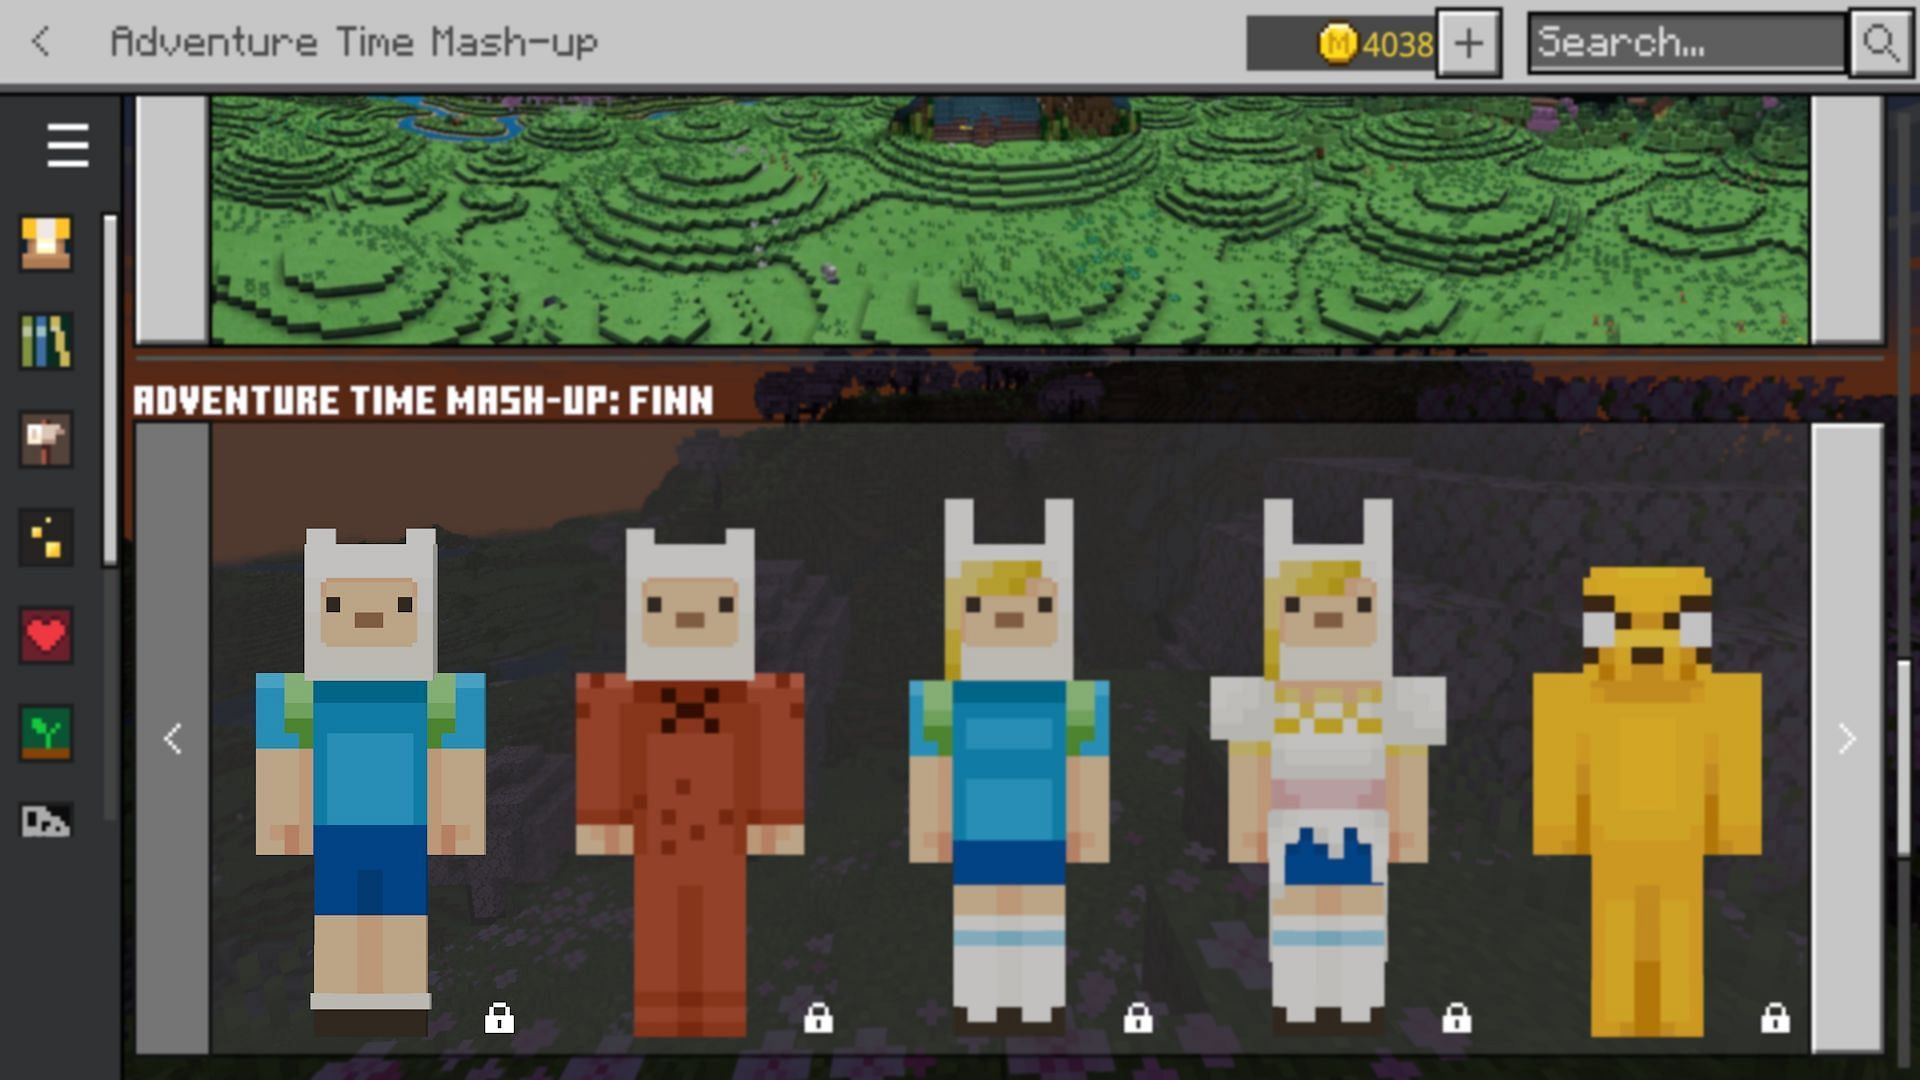 Honestly, almost any of the Adventure Time skins could have gotten this spot (Image via Mojang)